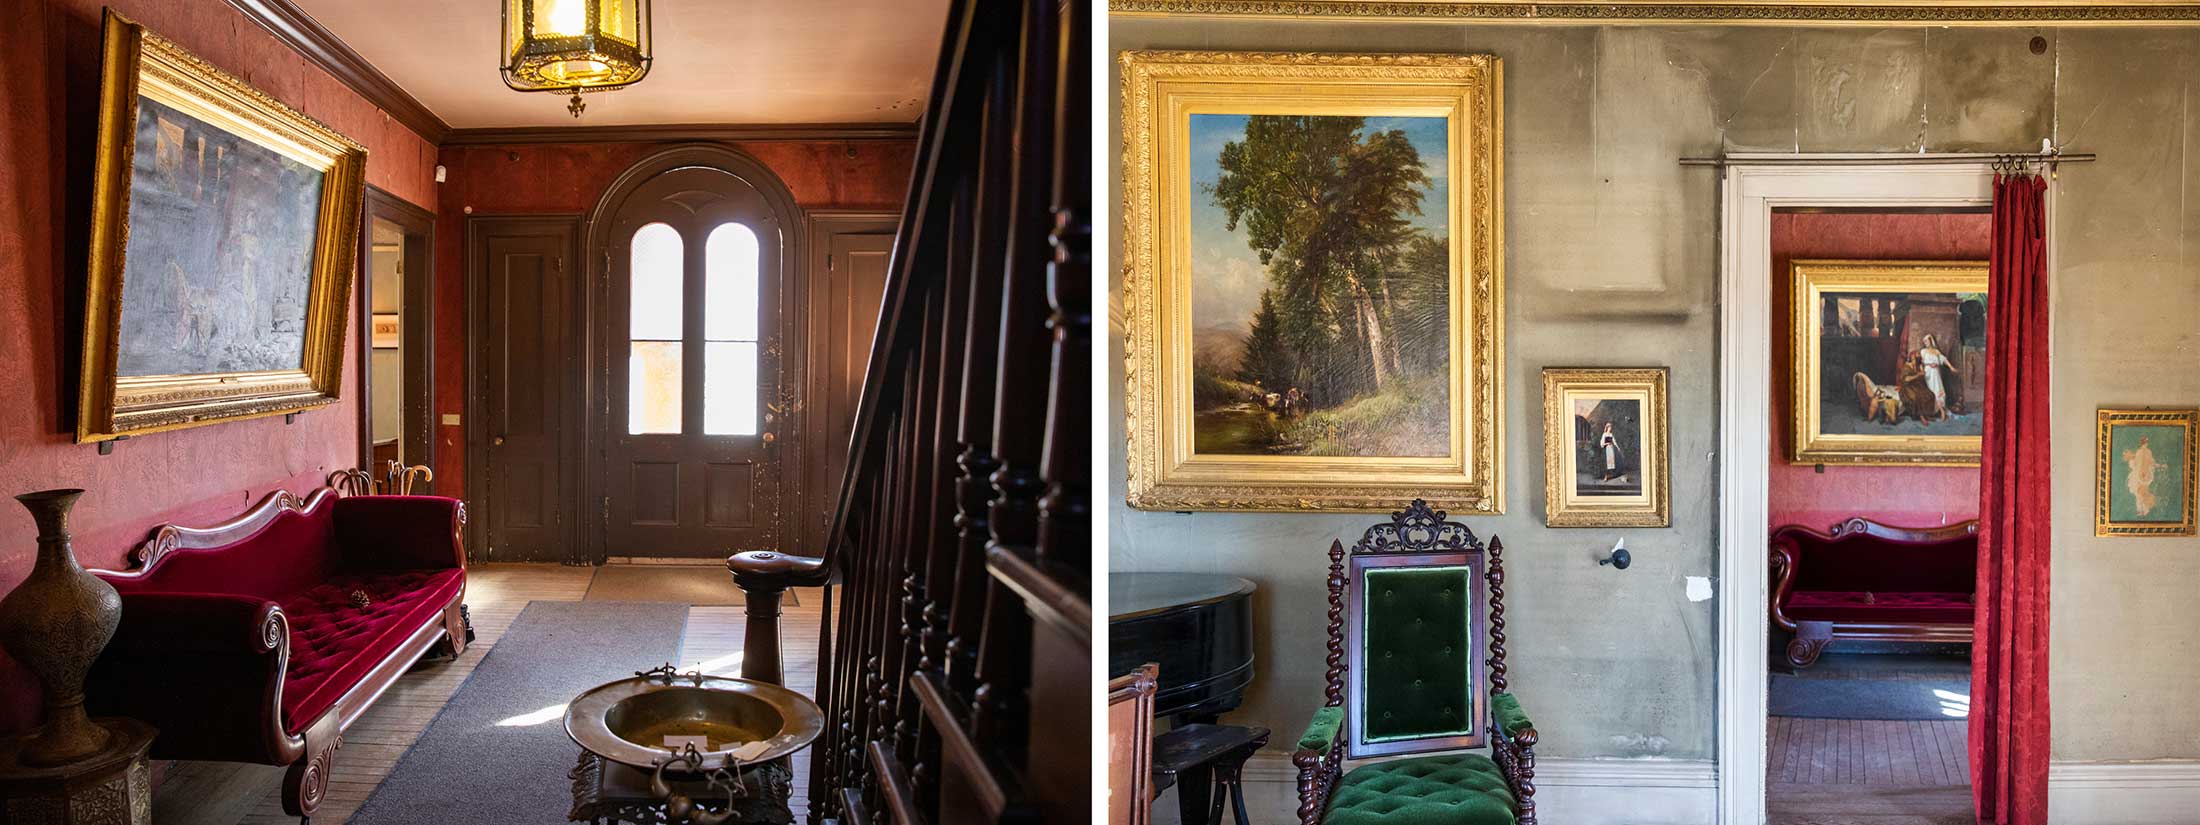 Interior images of the The Evergreens, the Italianate home of Emily’s brother Austin and sister-in-law Susan Gilbert